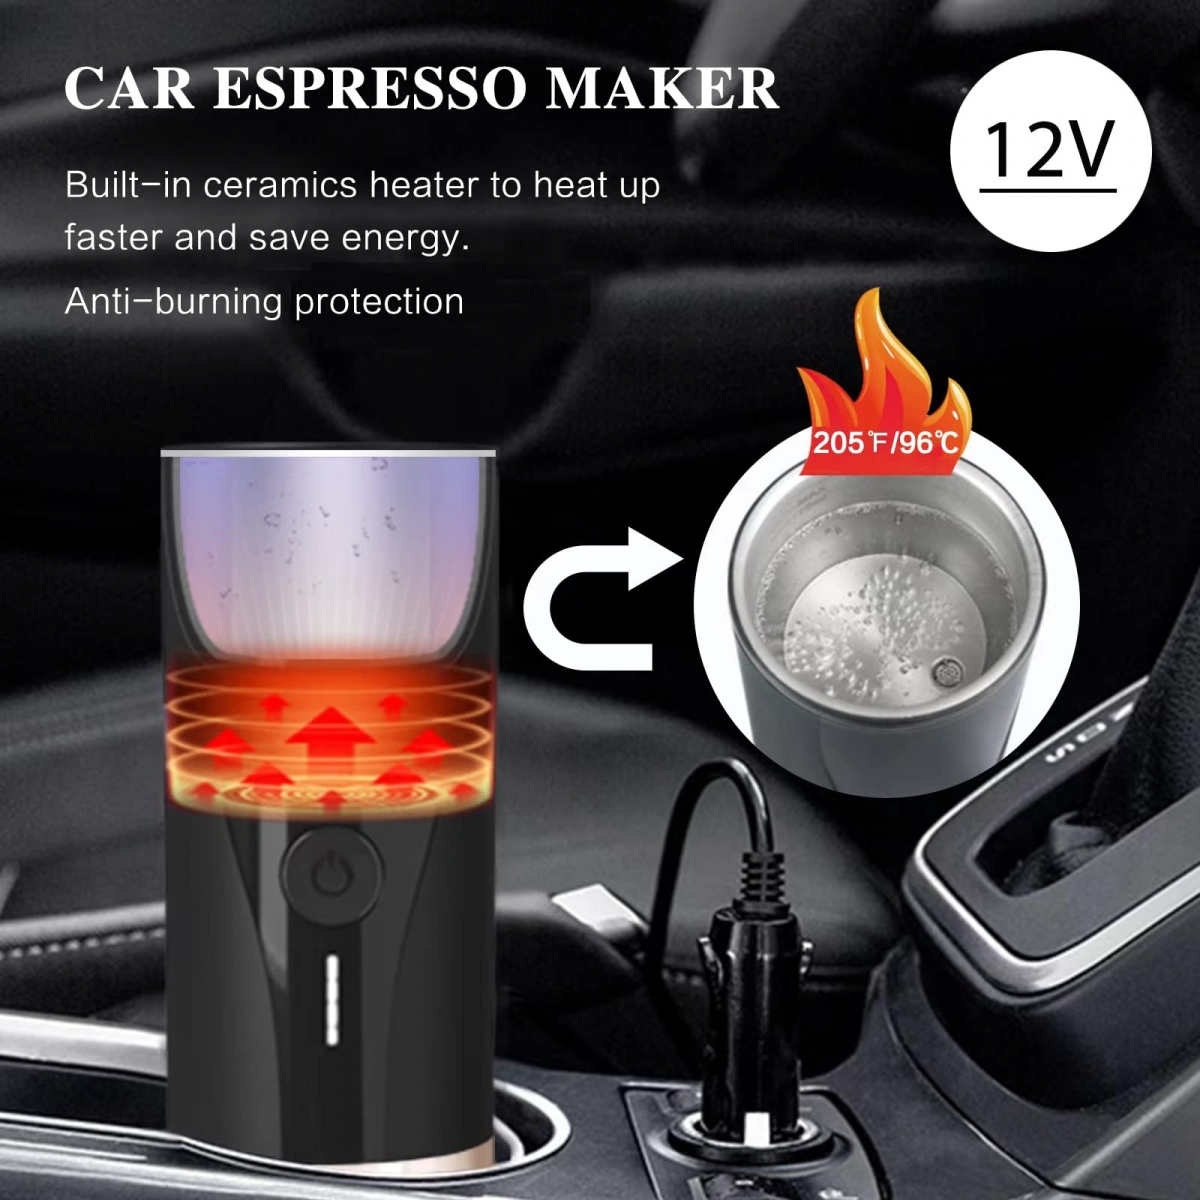 Connecting it to car cigarette lighter and pressing the button, the portable coffee maker starts to heats the water-CERA+| Portable Espresso Maker,Smart Warming Mug